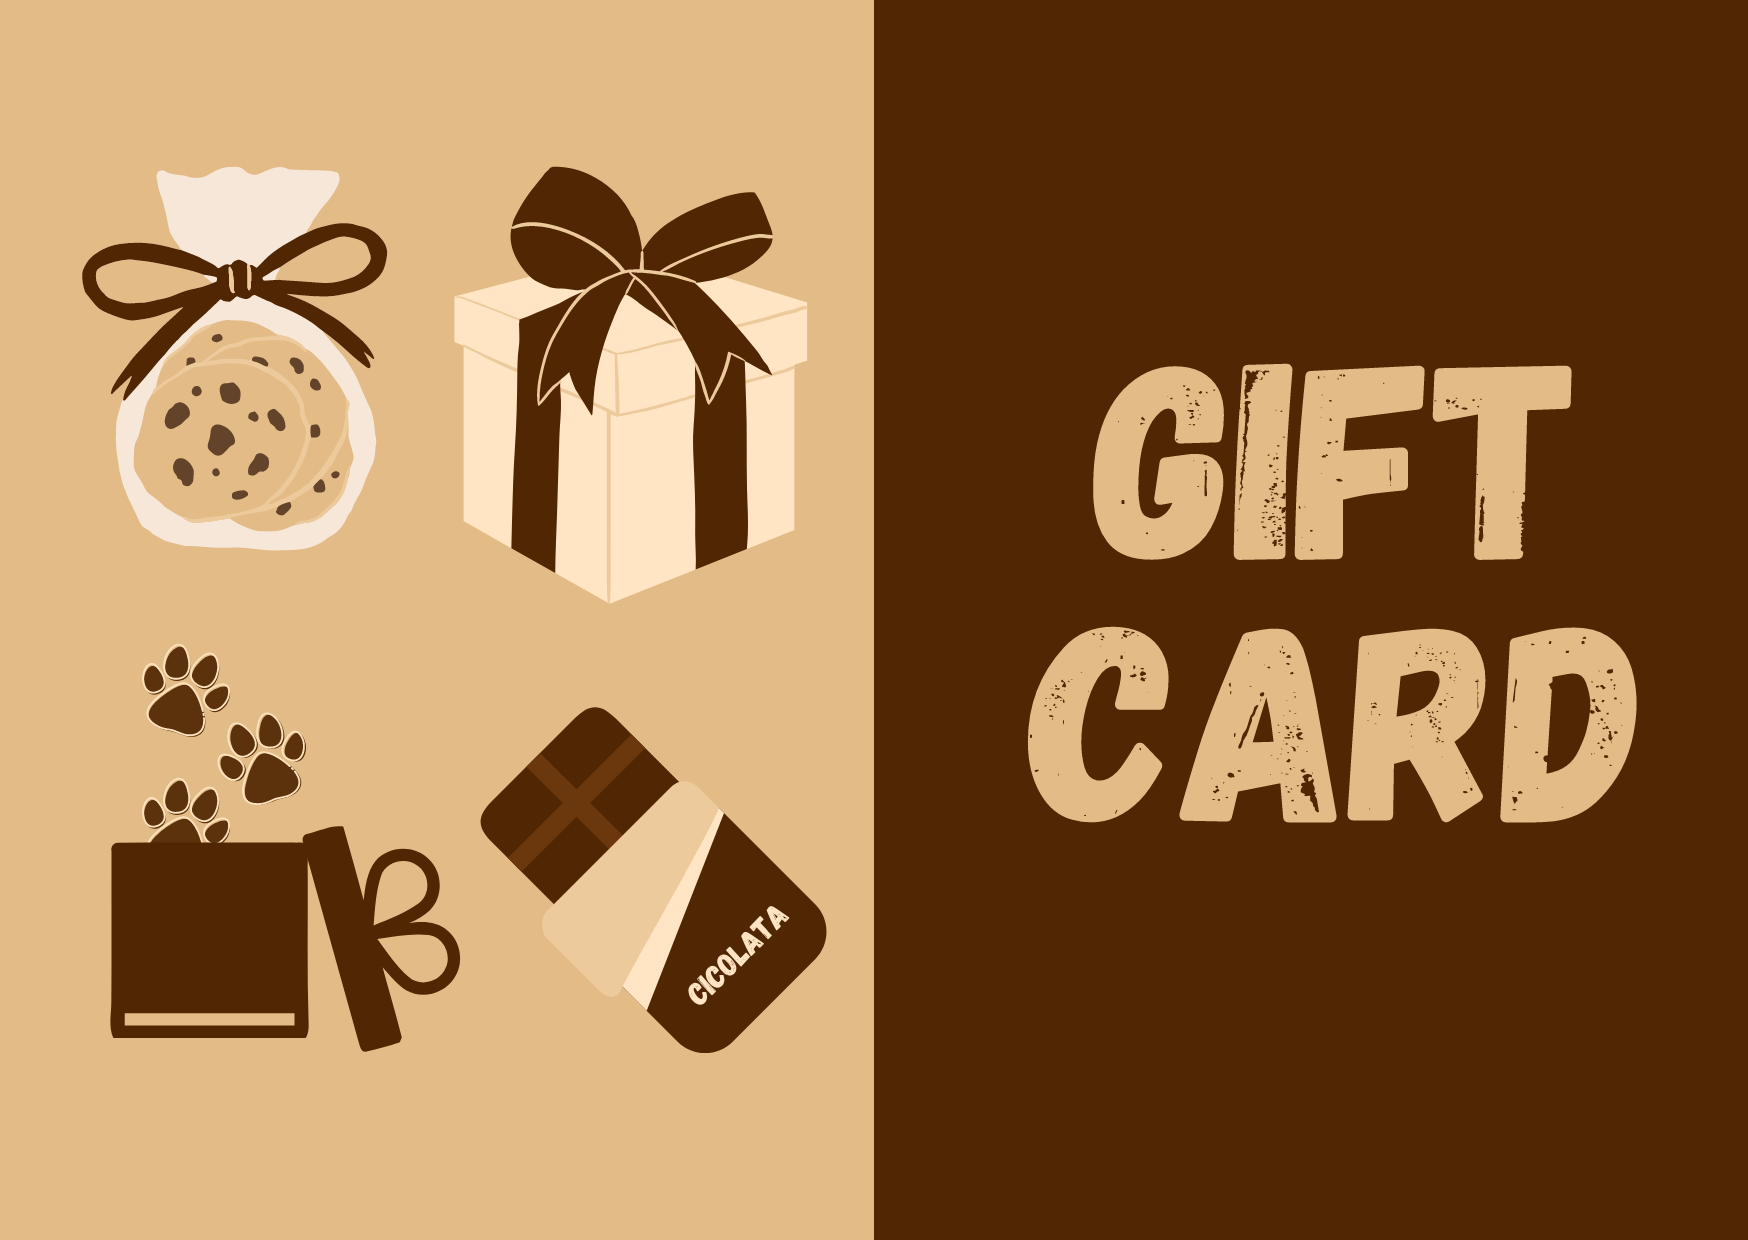 Gift Card Chico Shop